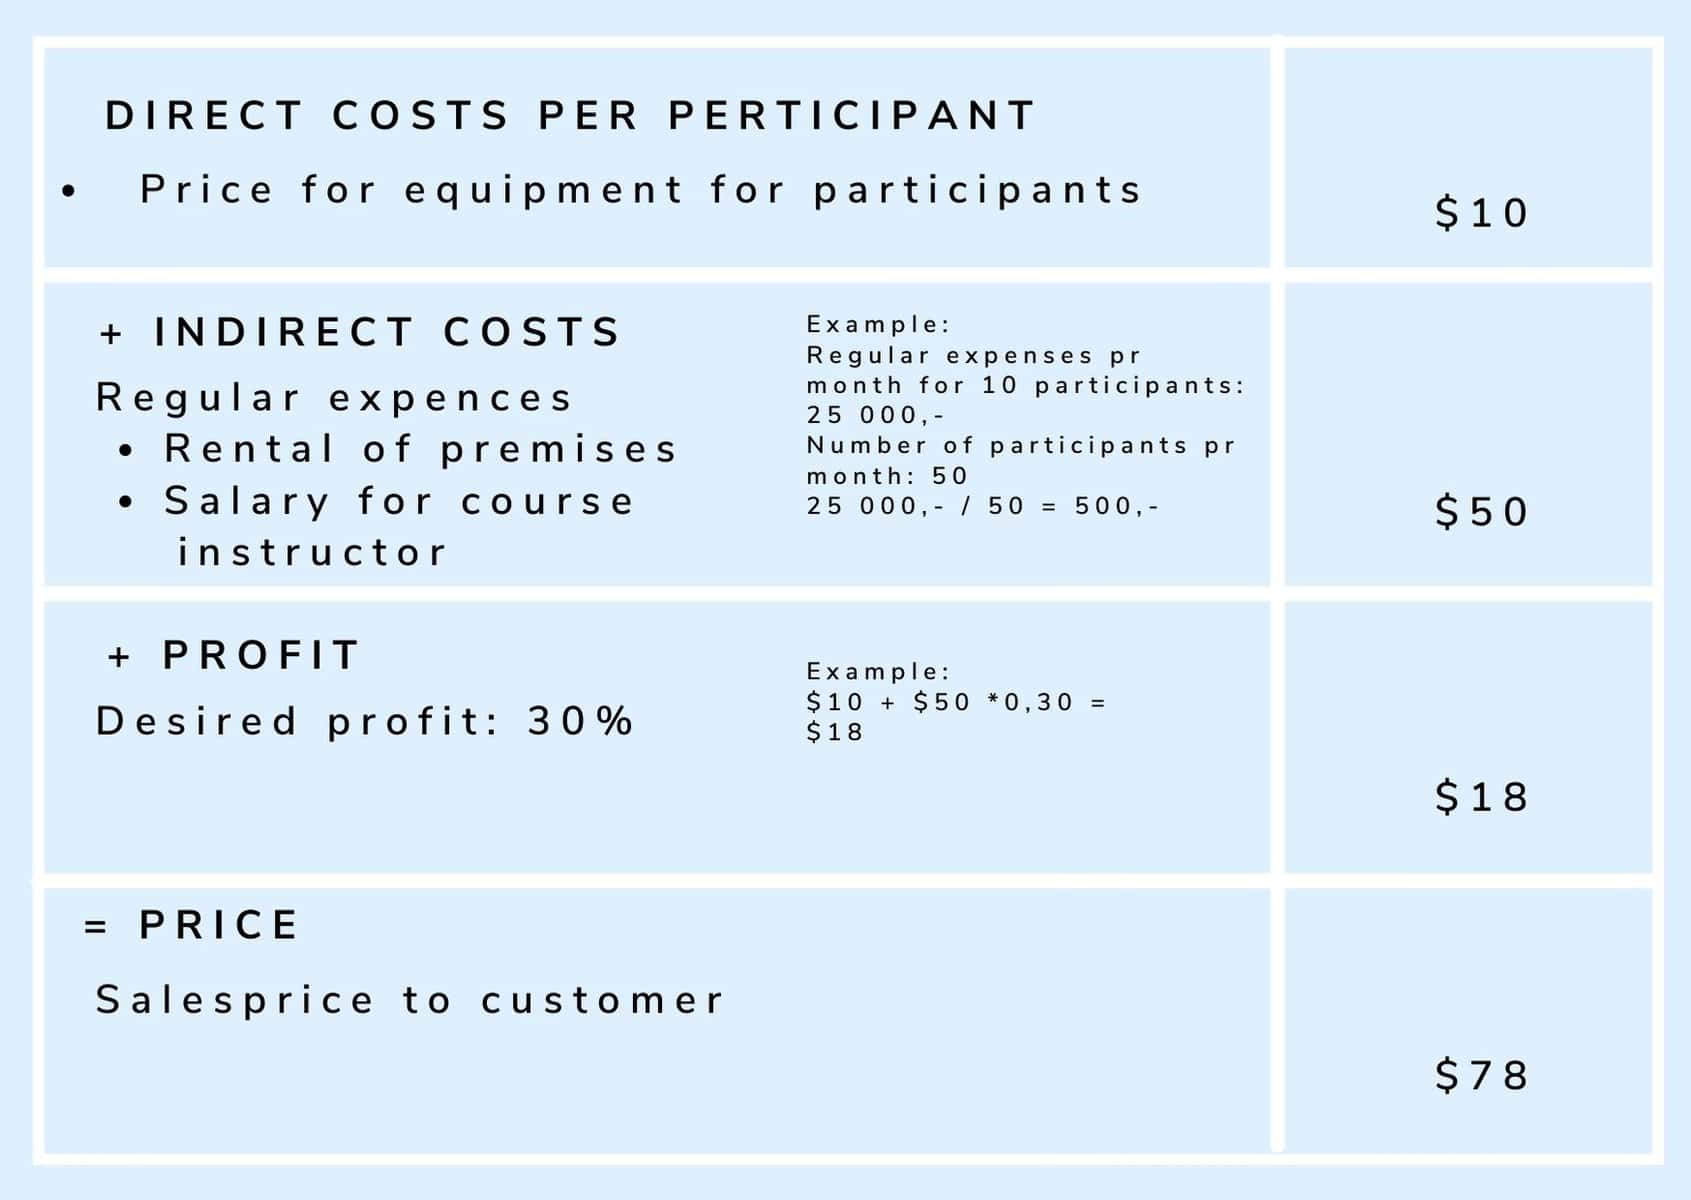 Cost based price calculation by FrontCore. 